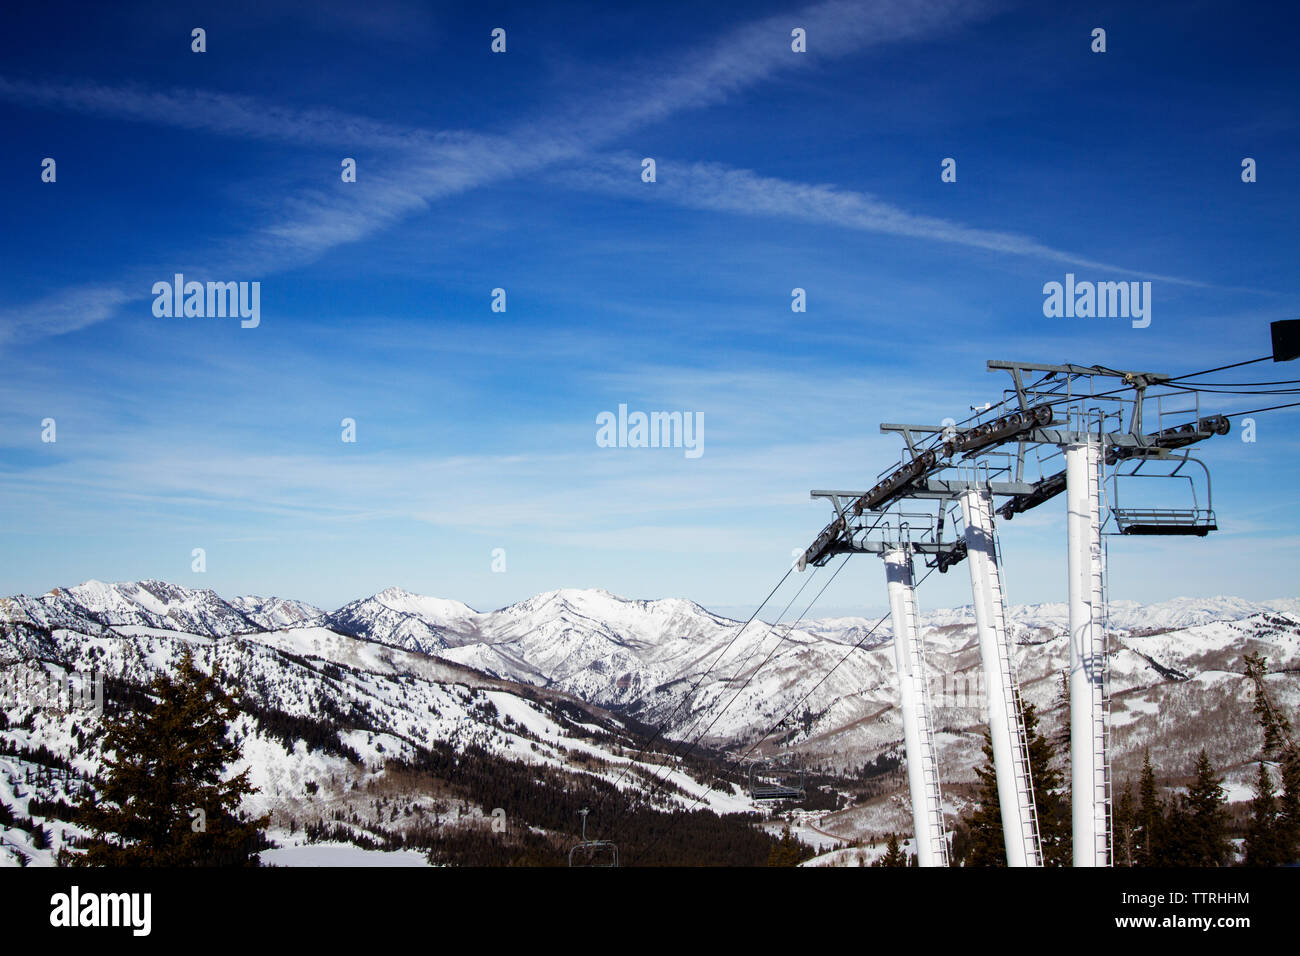 Ski lifts with snow covered Wasatch Mountain range in background Stock Photo